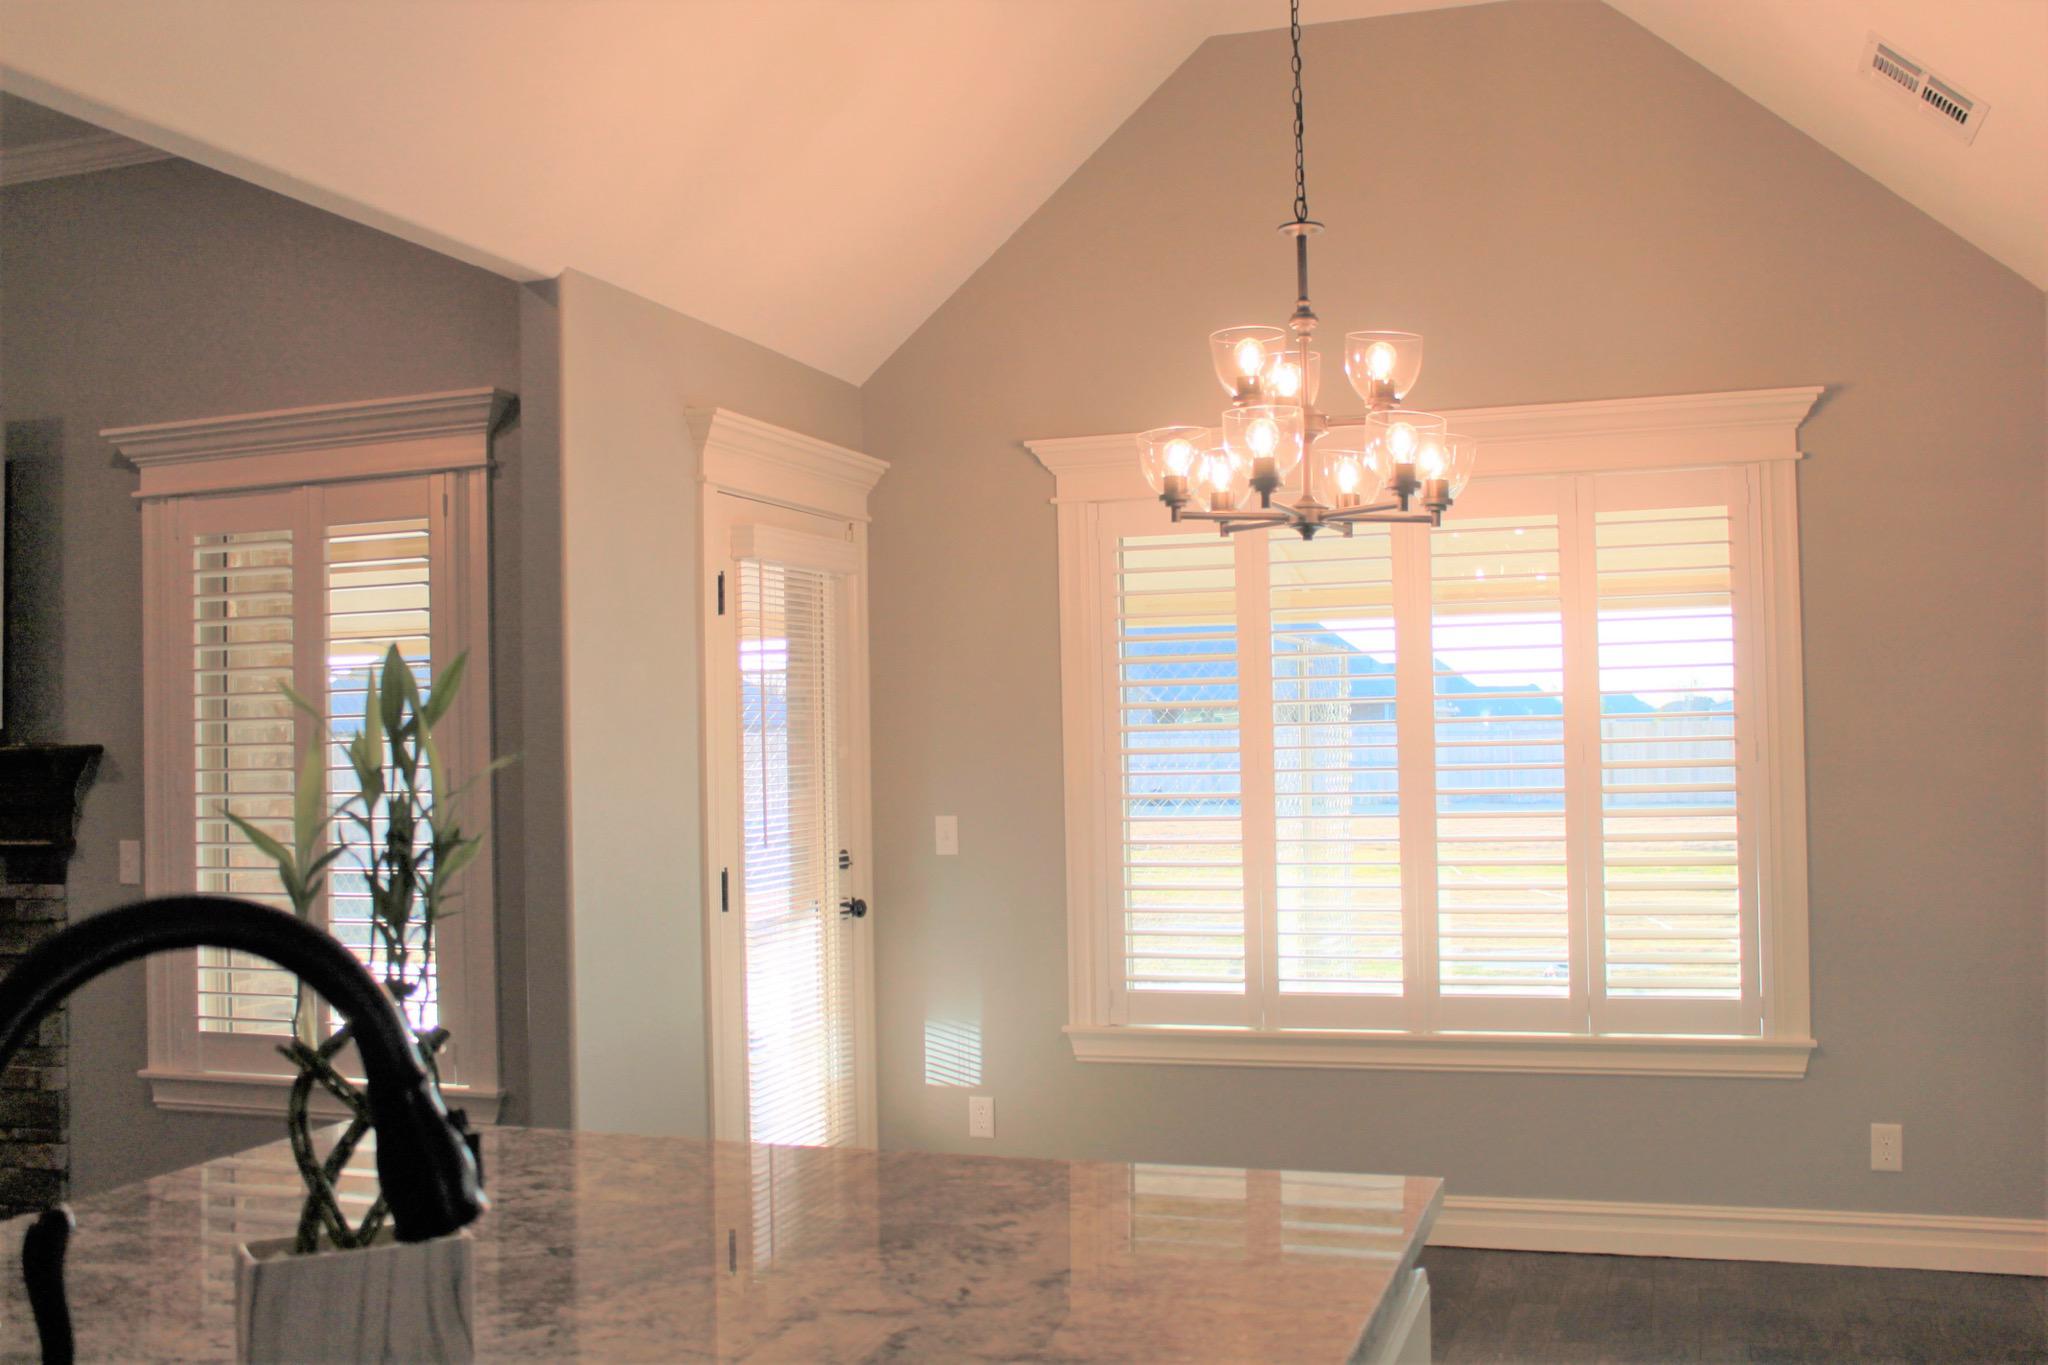 Norman Split Tilt Shutters are perfect for when you want privacy on the lower part of your window but don't want to restrict the view or light at the top. Shutters and Wood Blinds are timeless and a popular choice amongst homeowners.  BudgetBlindsOwasso  FreeConsultation  NormanShutters  SplitTiltSh